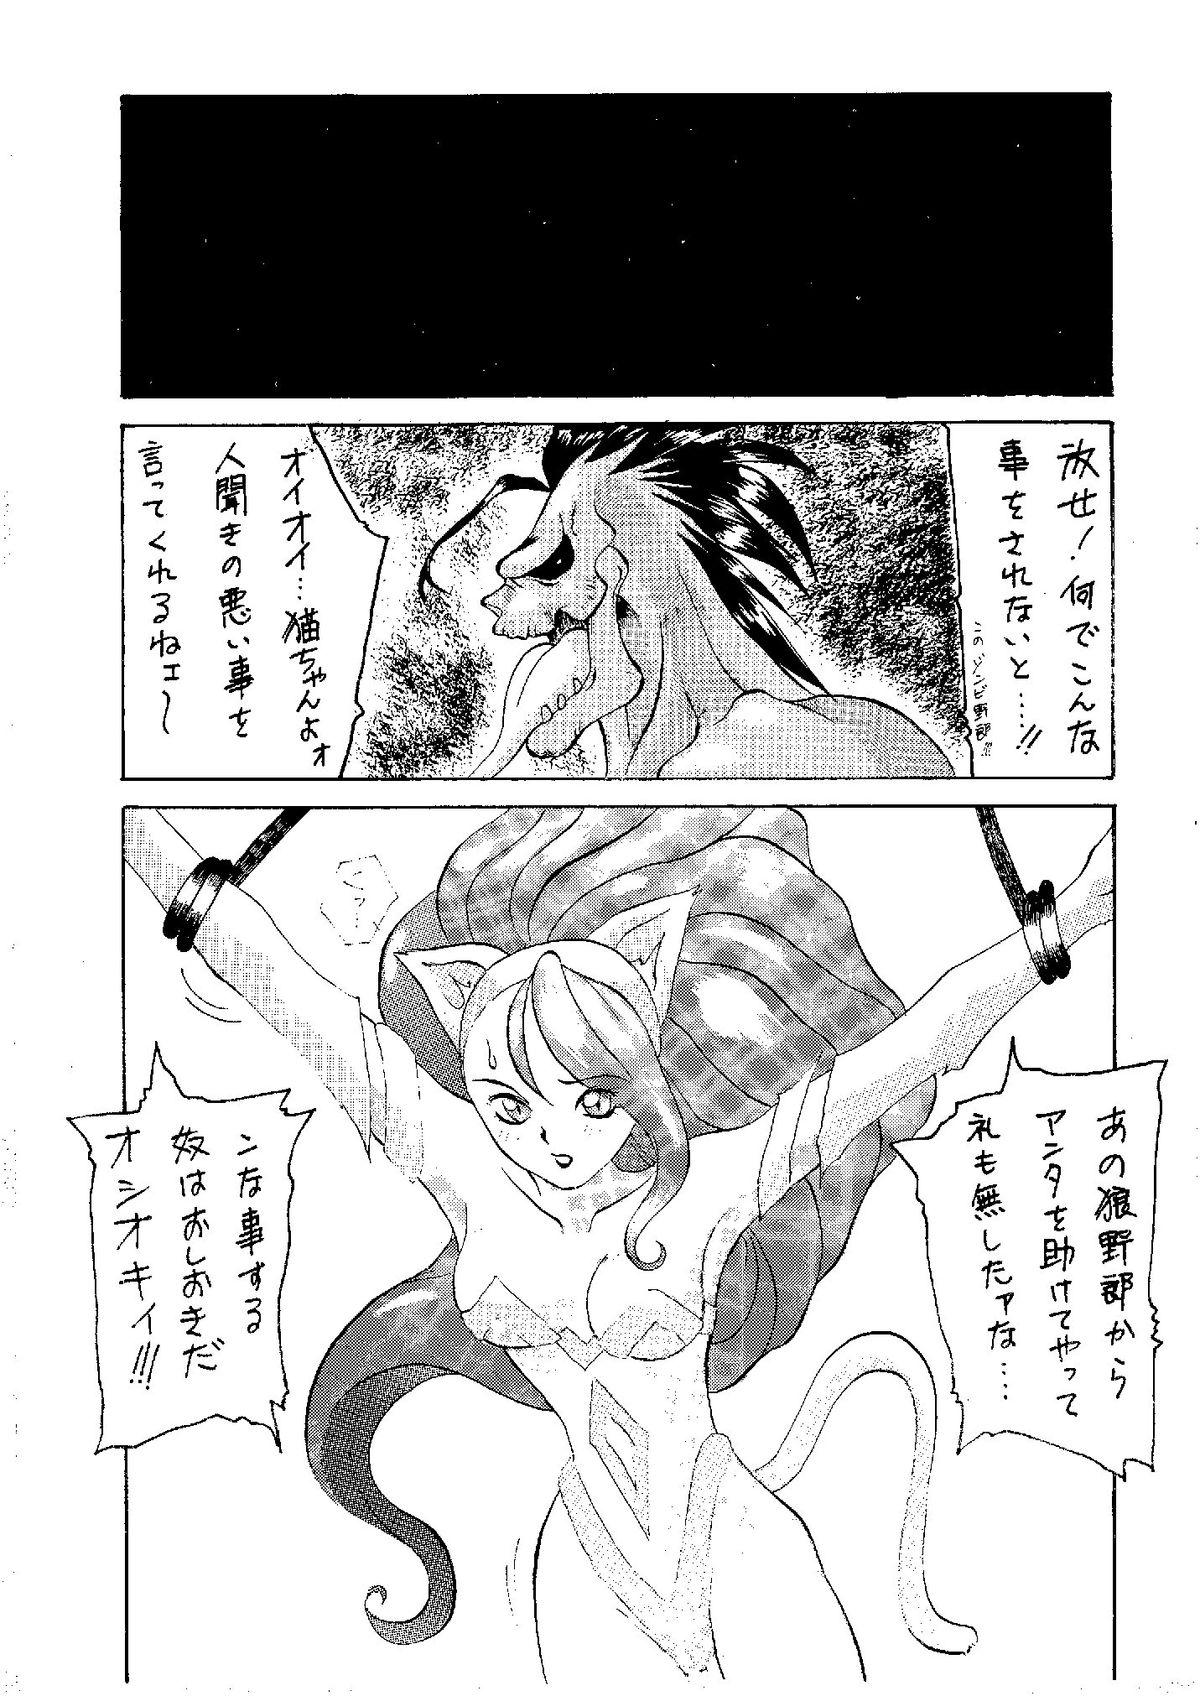 Hooker Shine of Darkness - Darkstalkers Anal Play - Page 7